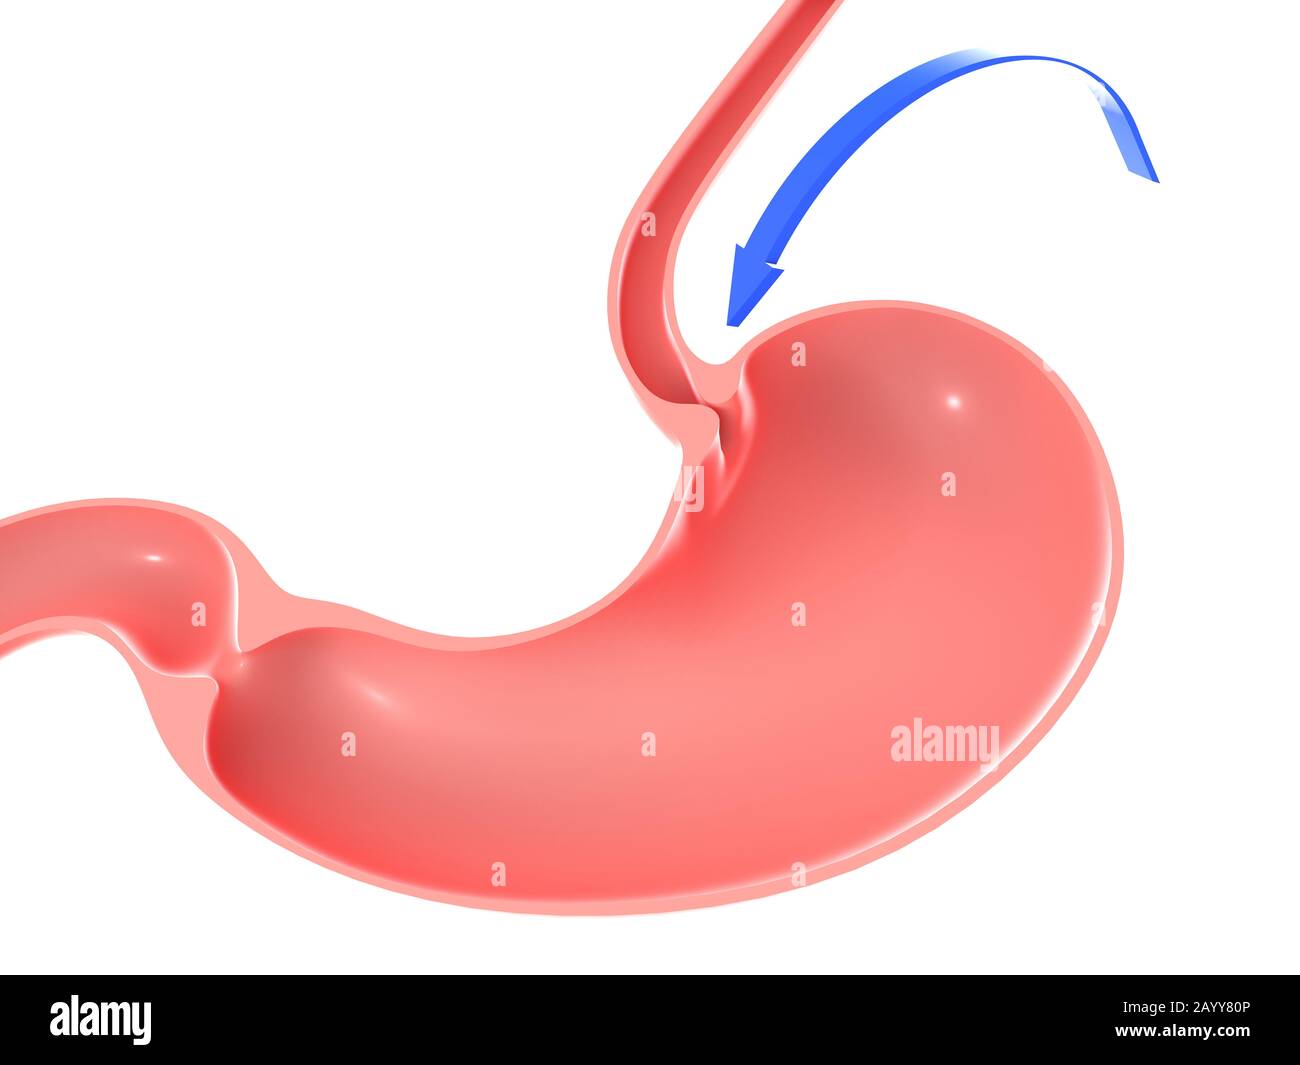 3D illustration of the human stomach, highlighting the duodenal sphincter and esophagus. With a blue arrow with movement pointing. Stock Photo